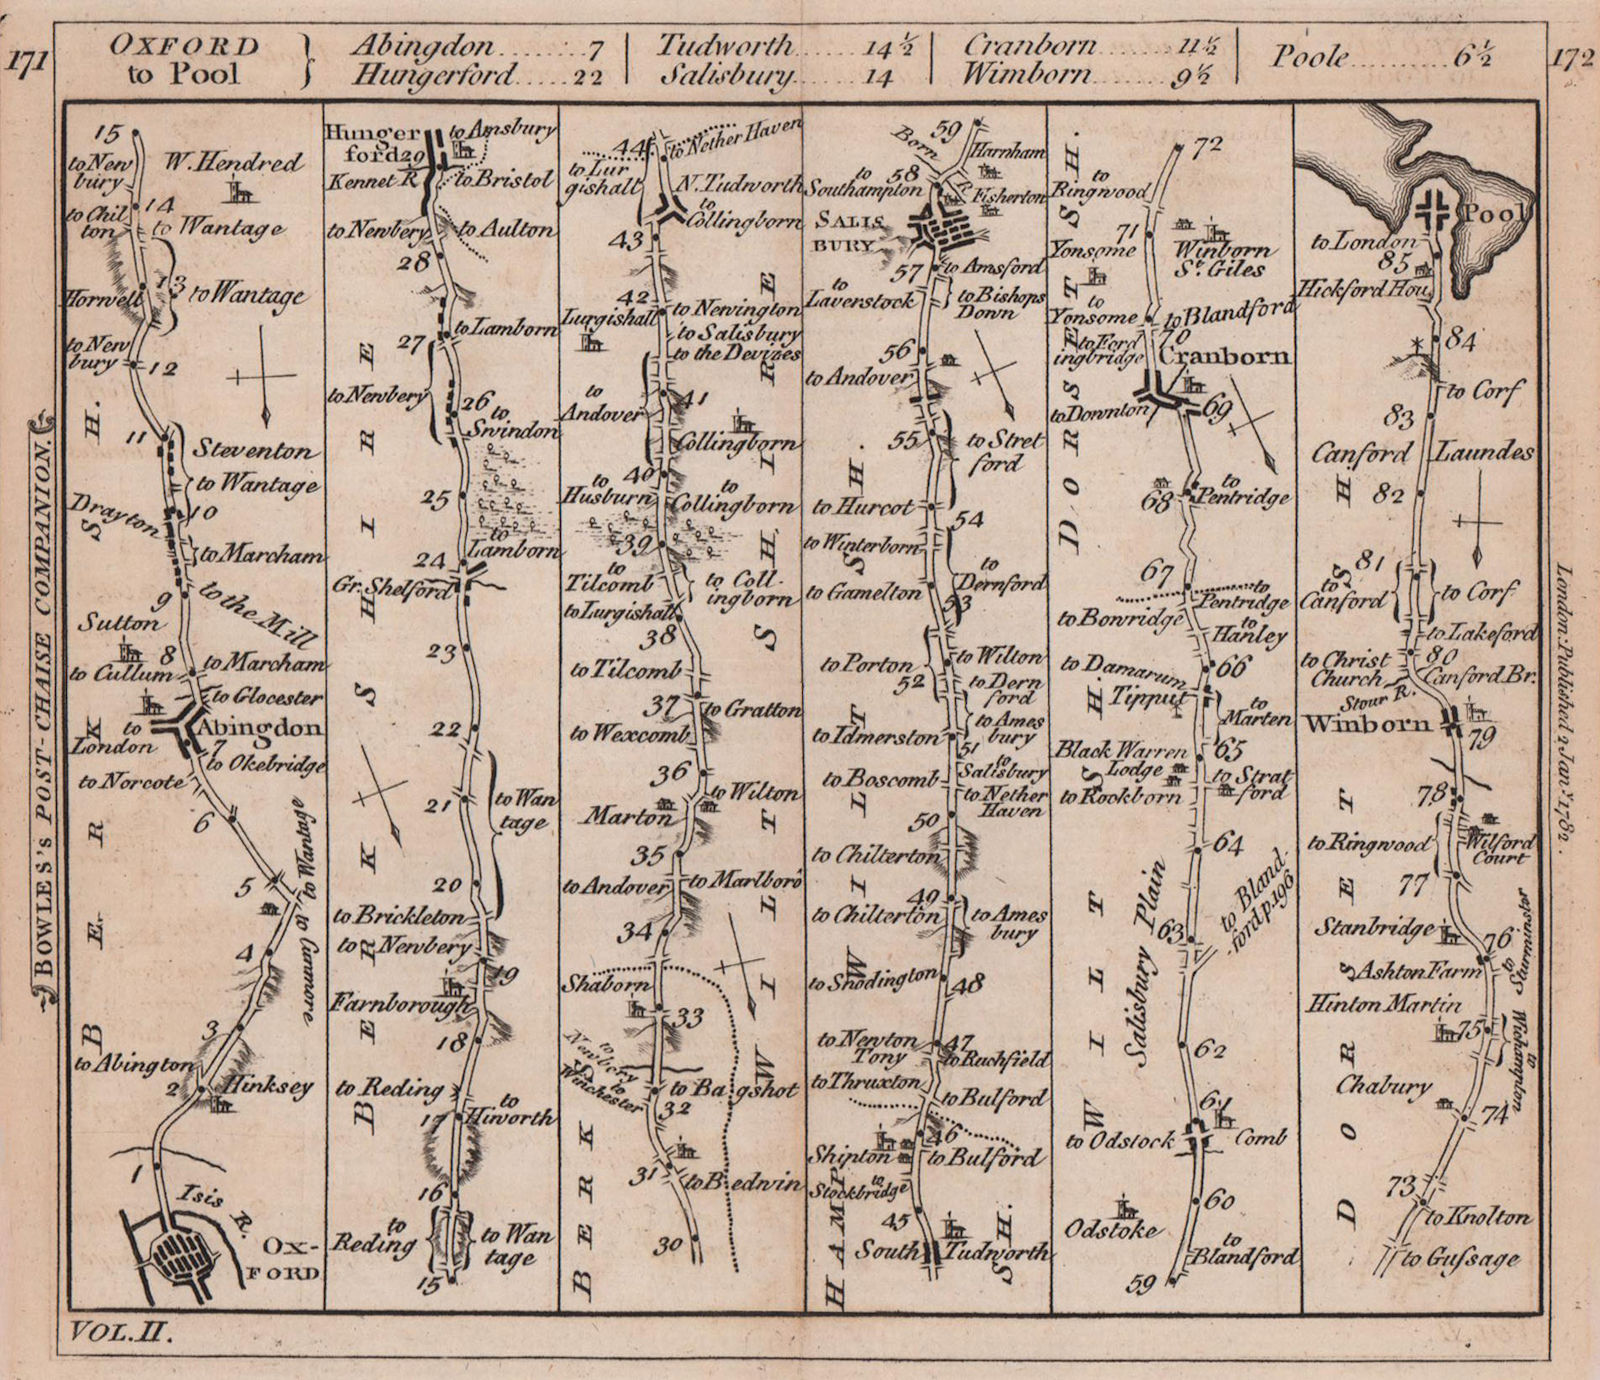 Oxford-Abingdon-Hungerford-Salisbury-Poole road strip map. BOWLES 1782 old